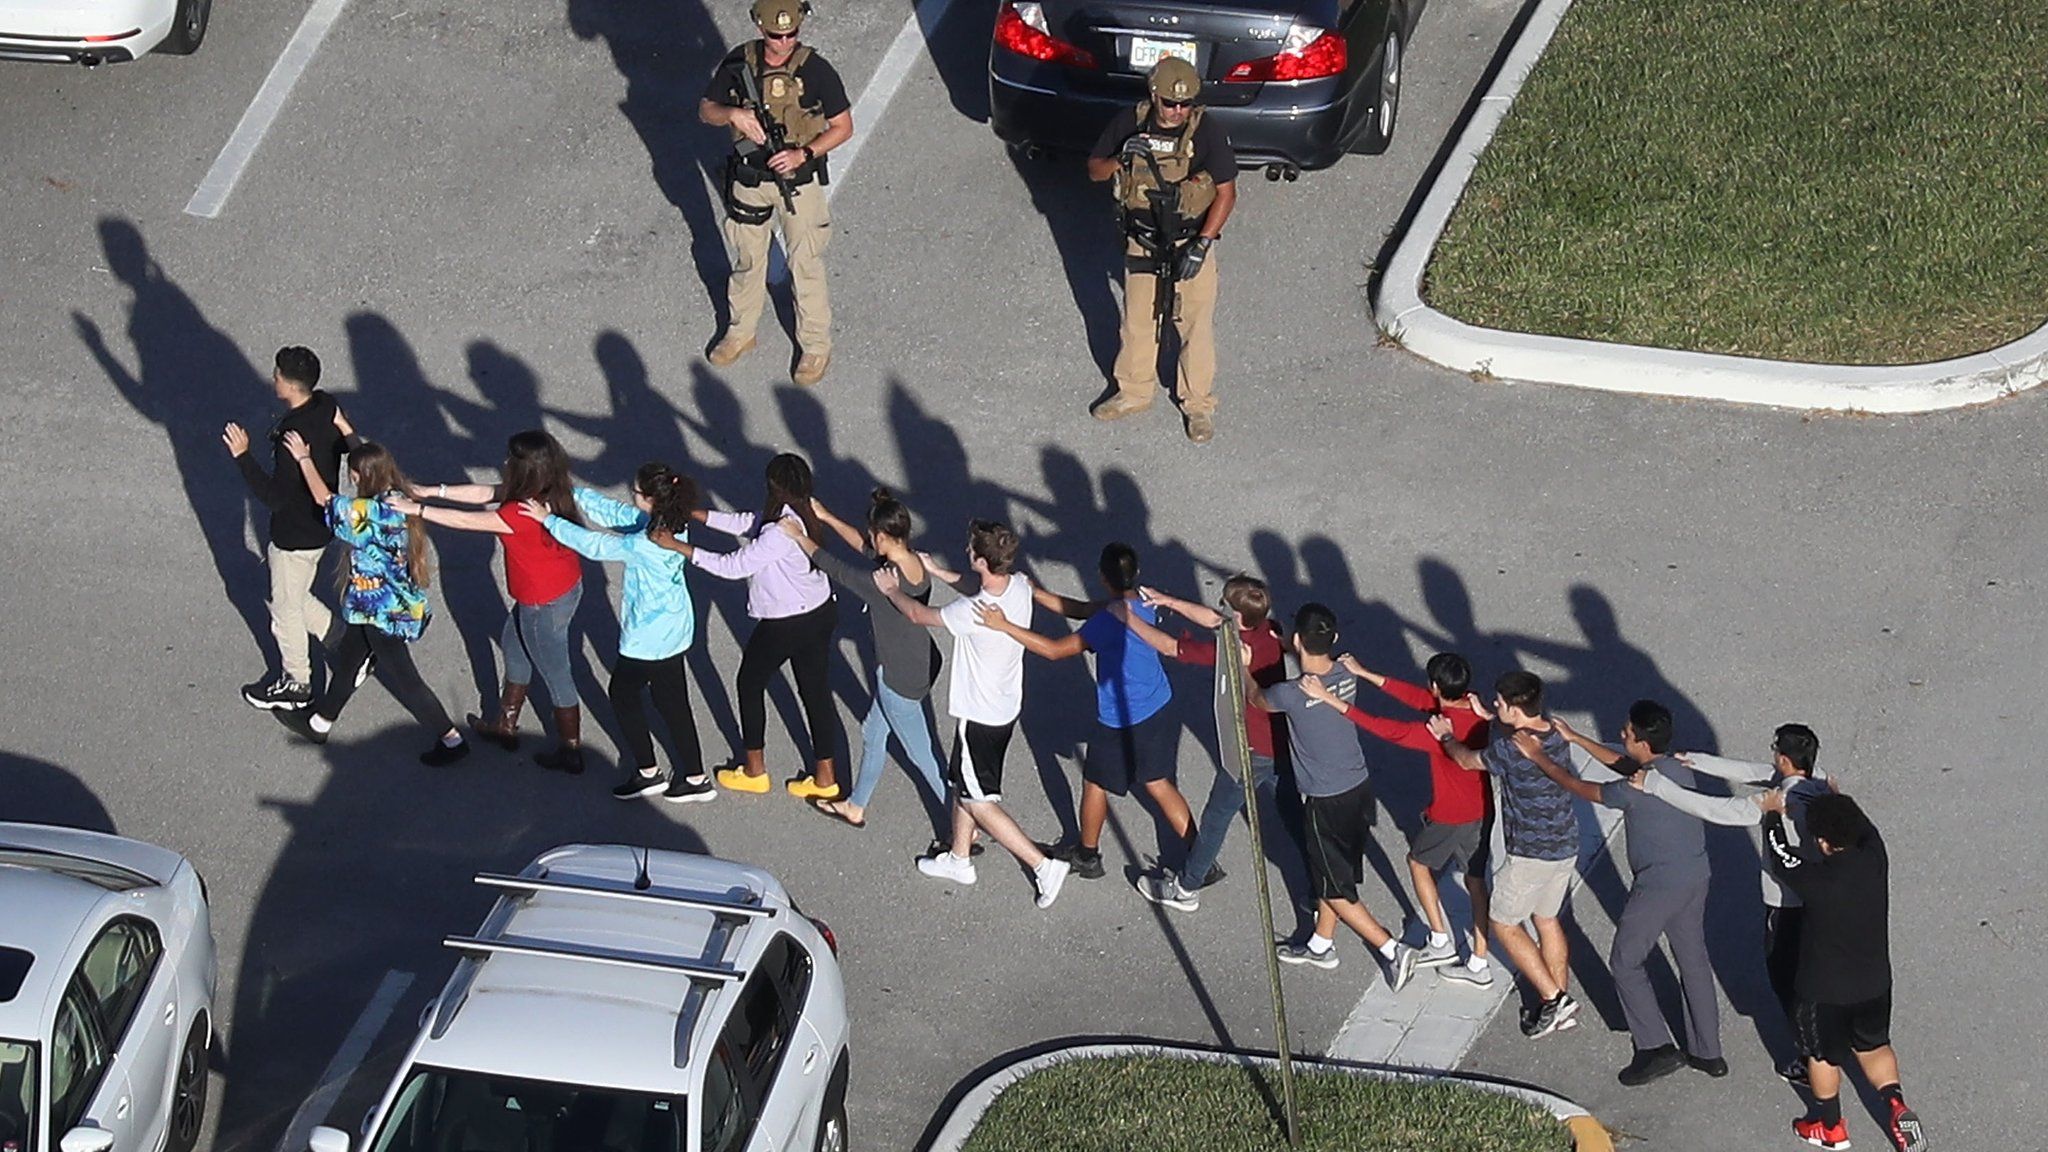 People are brought out of the Marjory Stoneman Douglas High School after a shooting at the school that reportedly killed and injured multiple people on February 14, 2018 in Parkland, Florida.